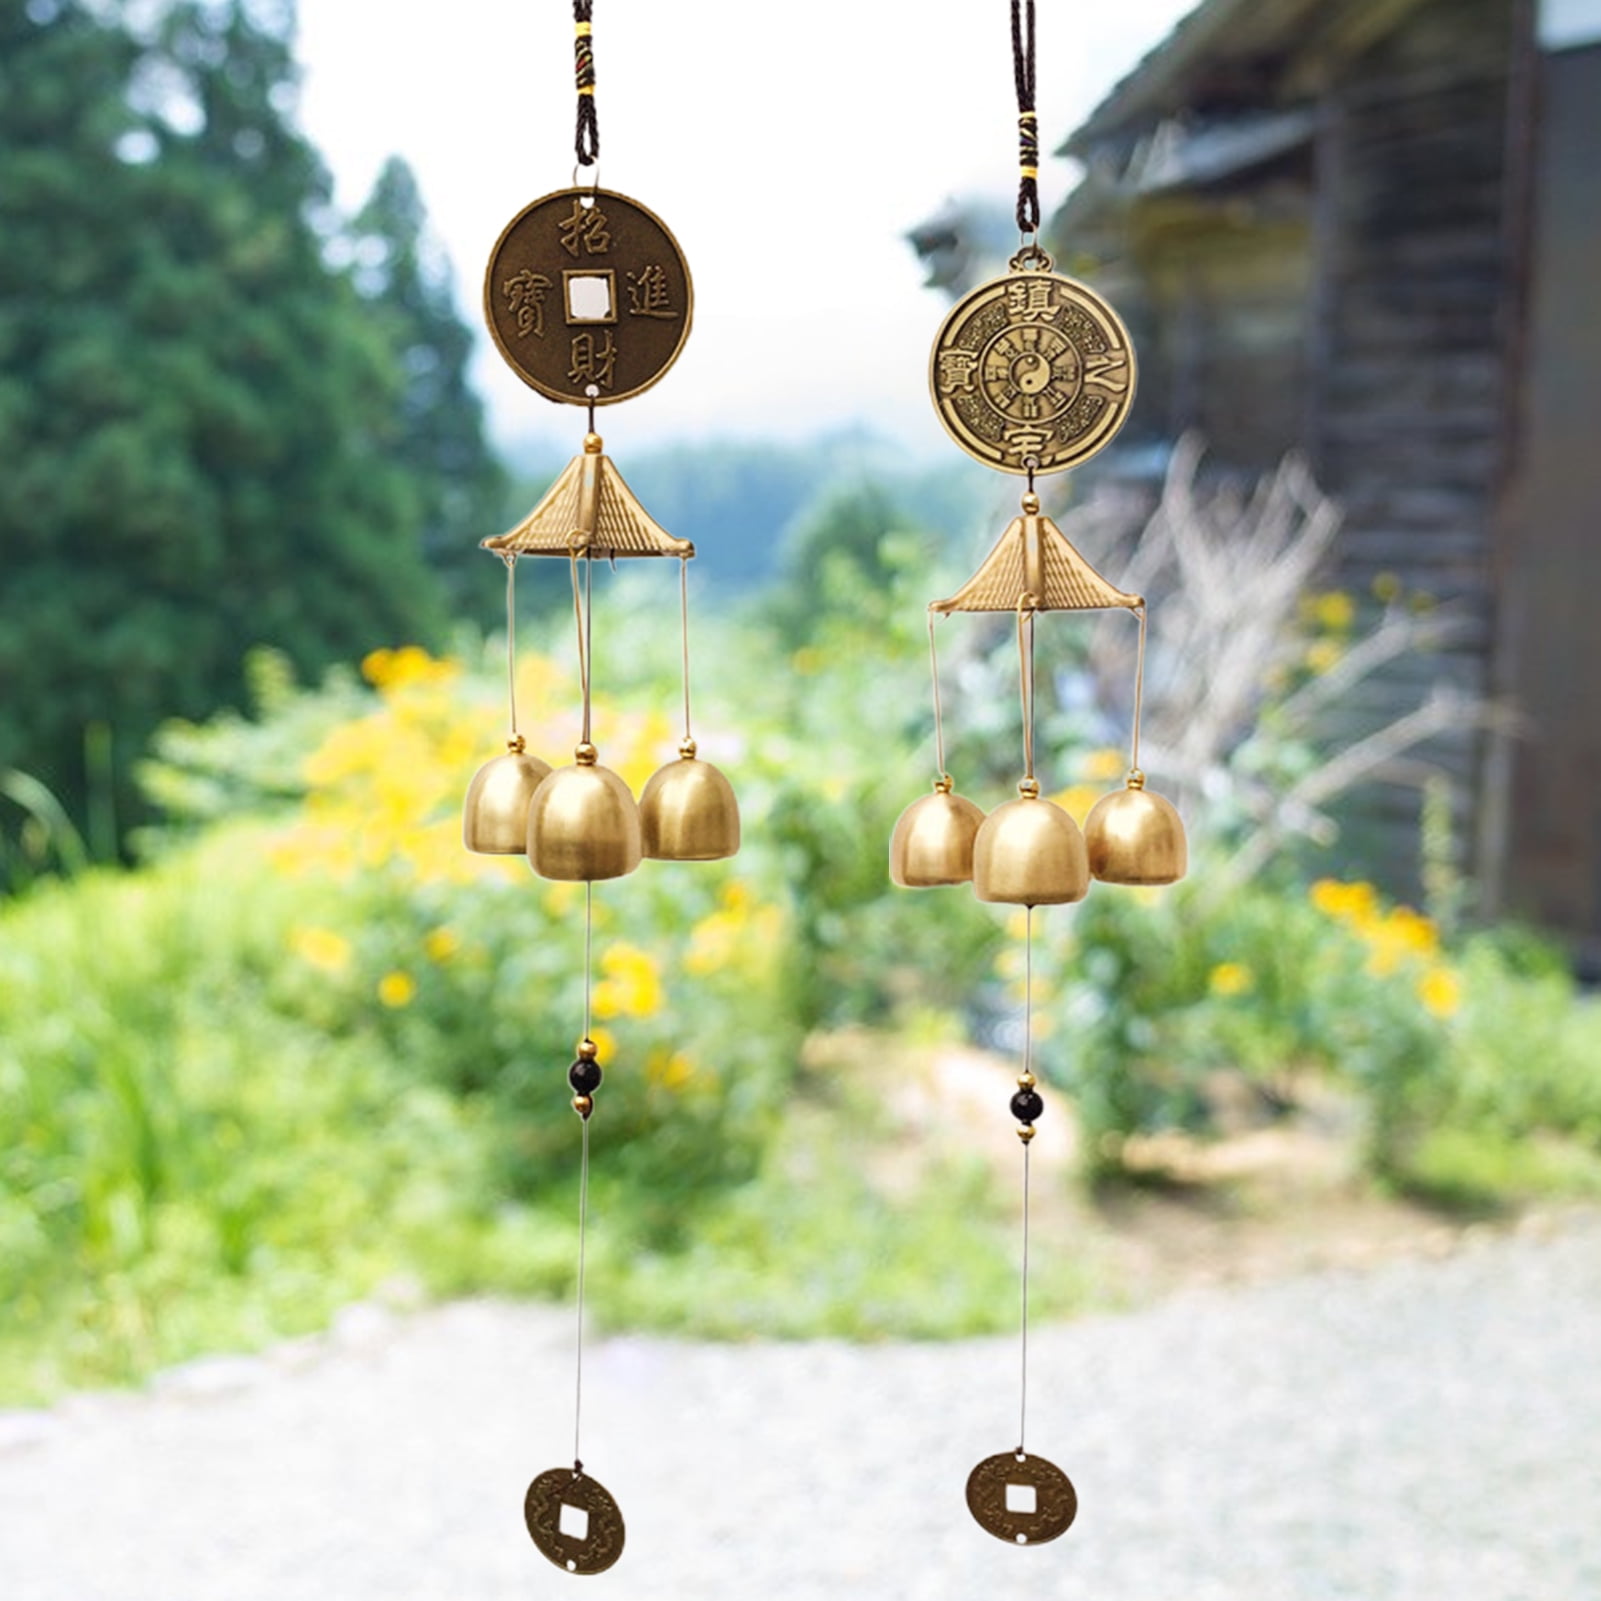 Arlmont & Co. 4 Hanging Bell Decorative Wind Chime - White and Beige  Circle Design Outdoor or Indoor Decorative Bells for Home Decor - Creative  Gift Idea